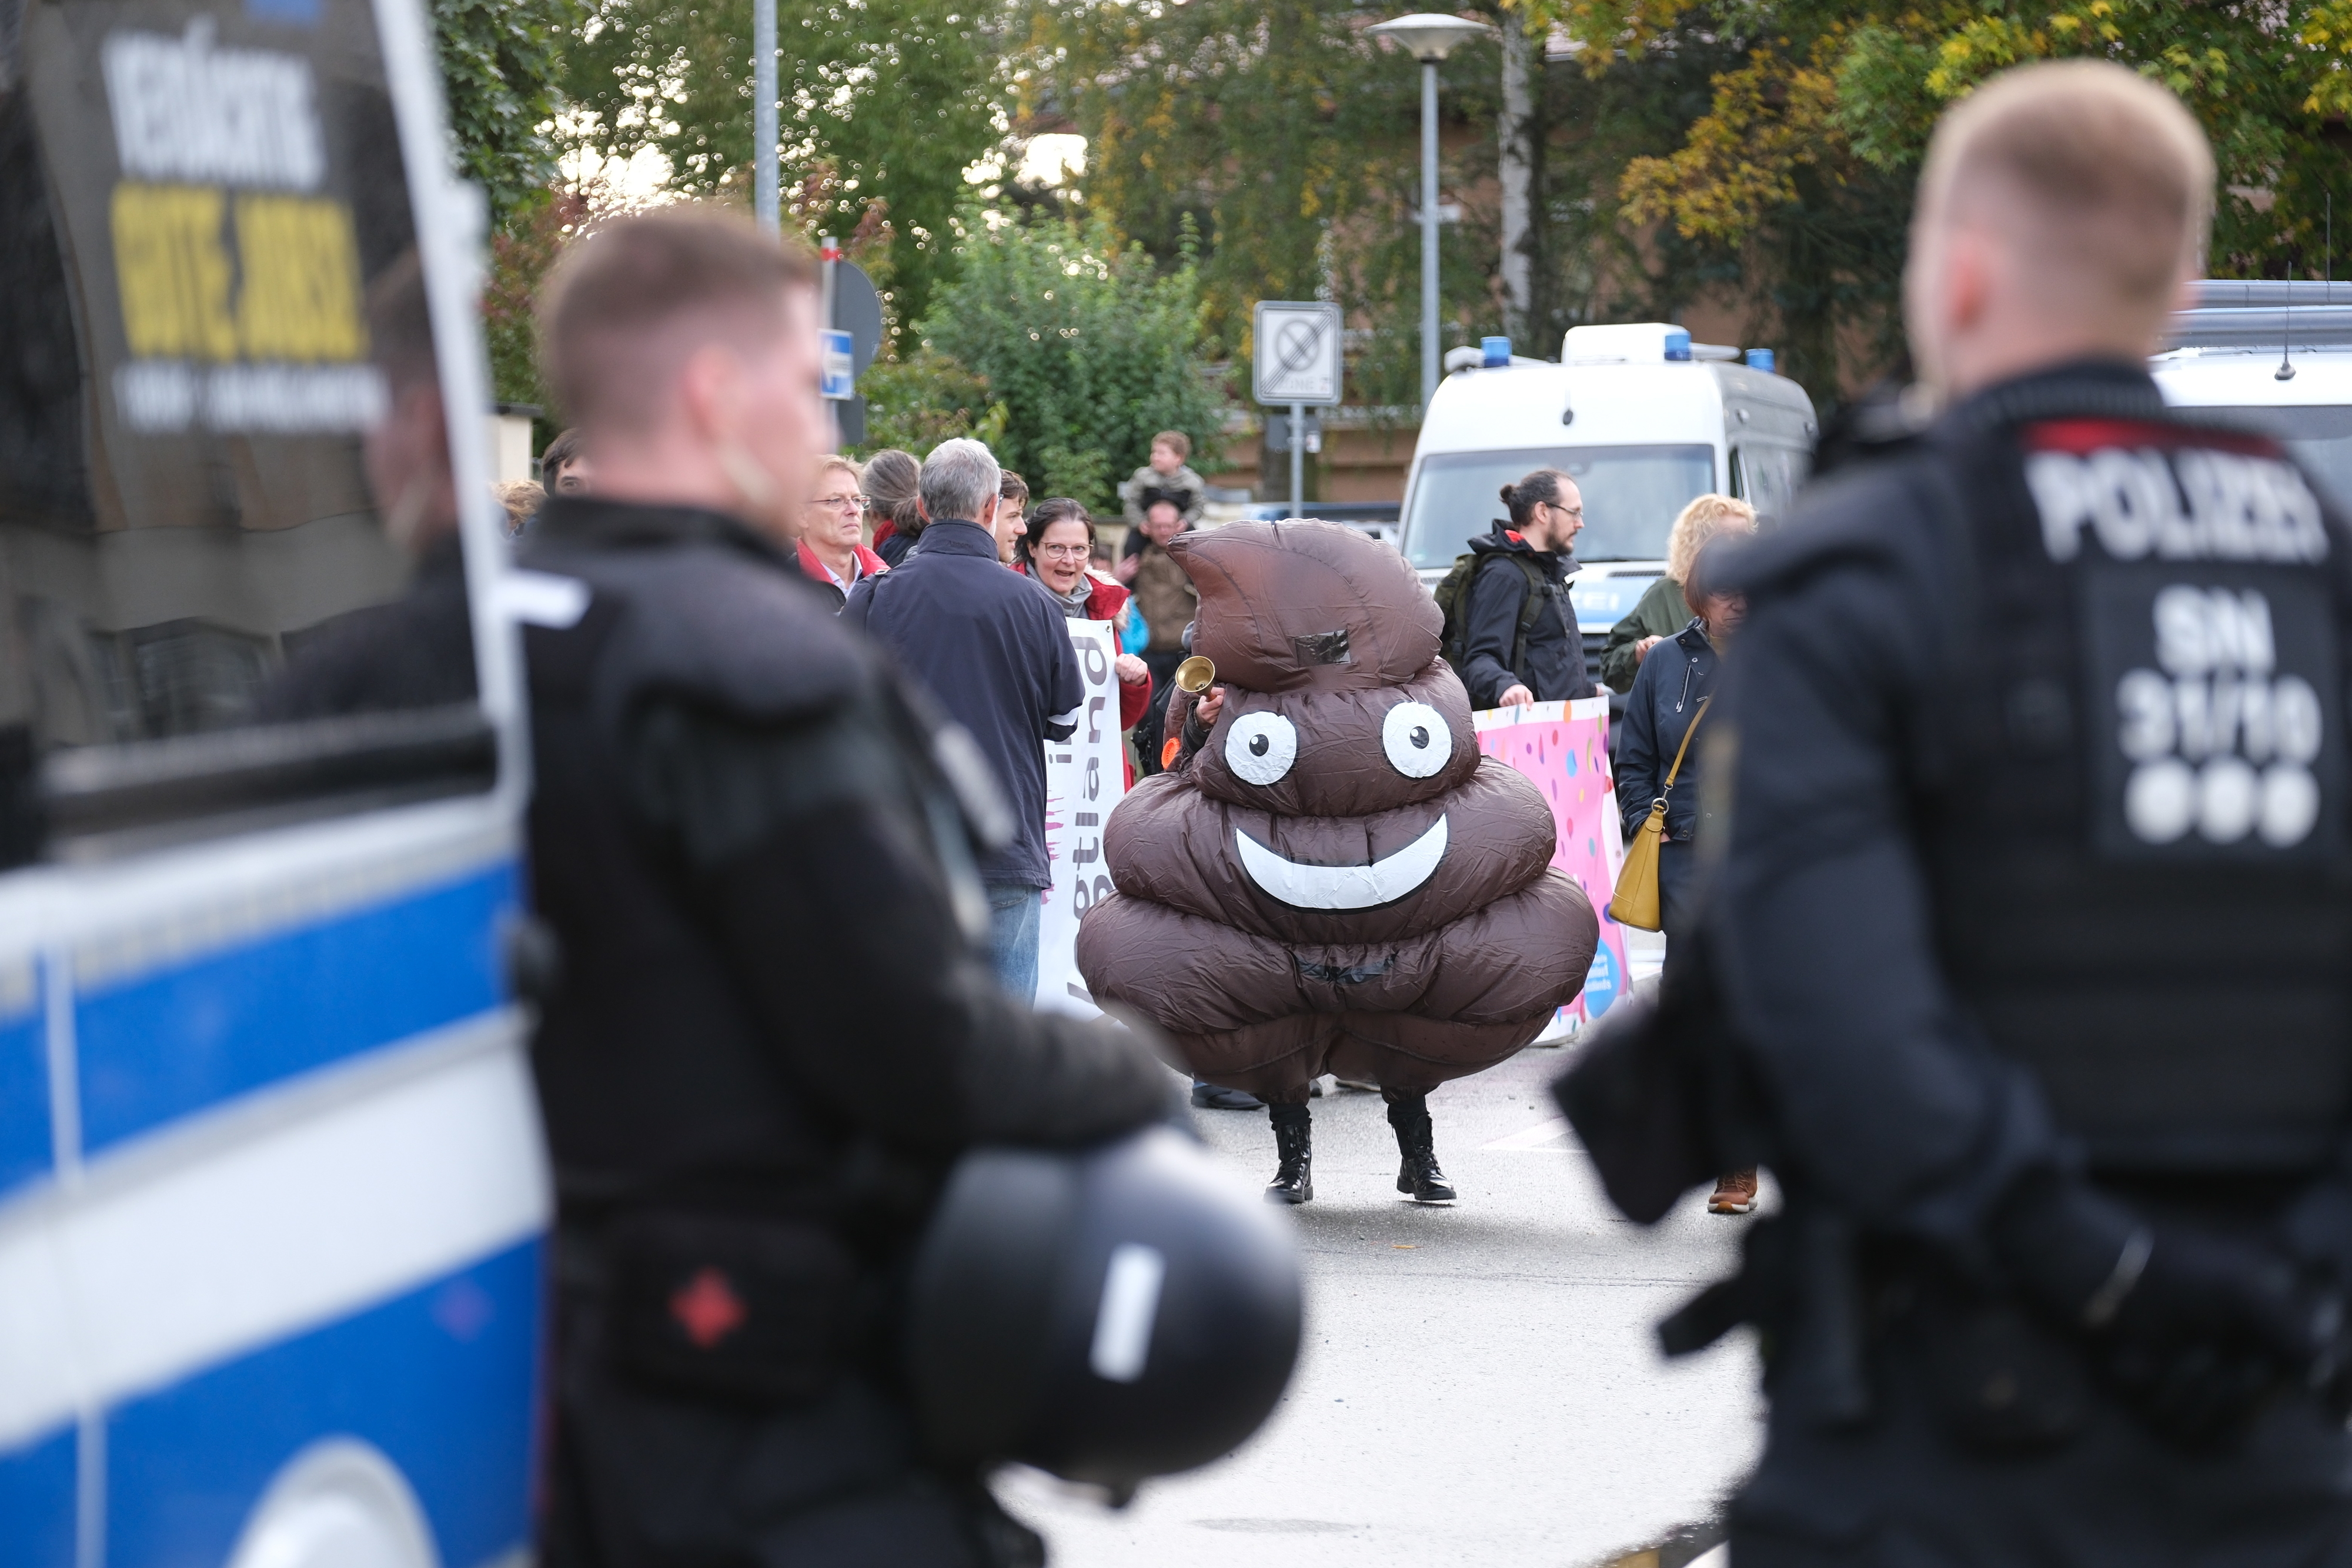 a person dressed as the poop emoji (a swirly piece of poop with eyes) stands in the background, between two blurry police officers in the foreground